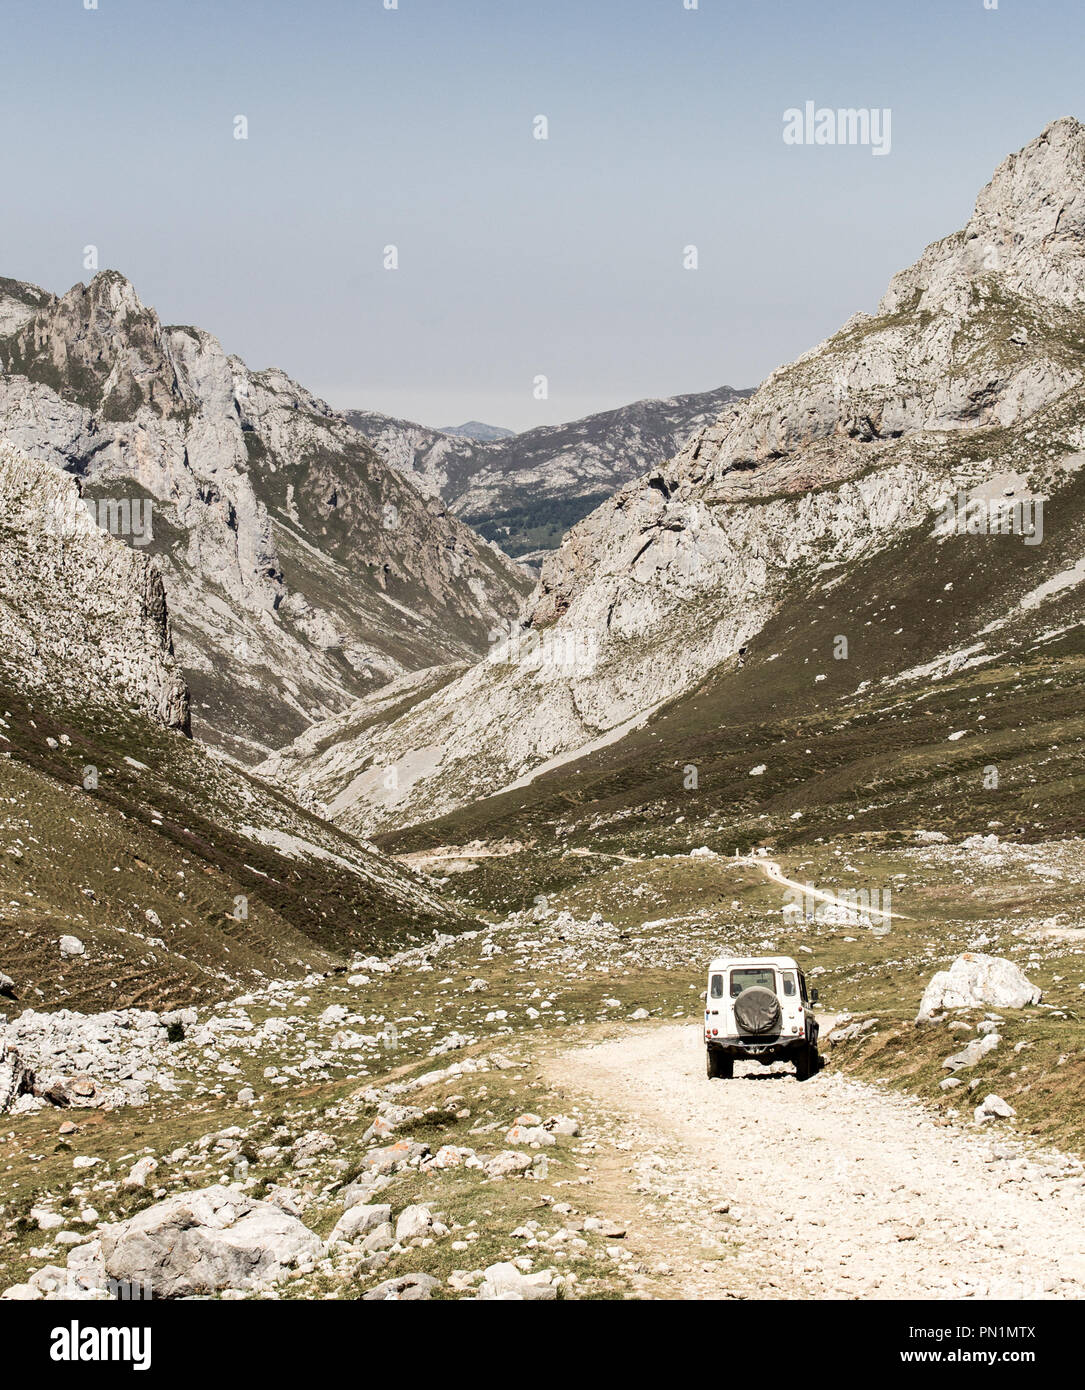 Gravel road along the mountains on a clear day, with an off-road vehicle parked by. Stock Photo